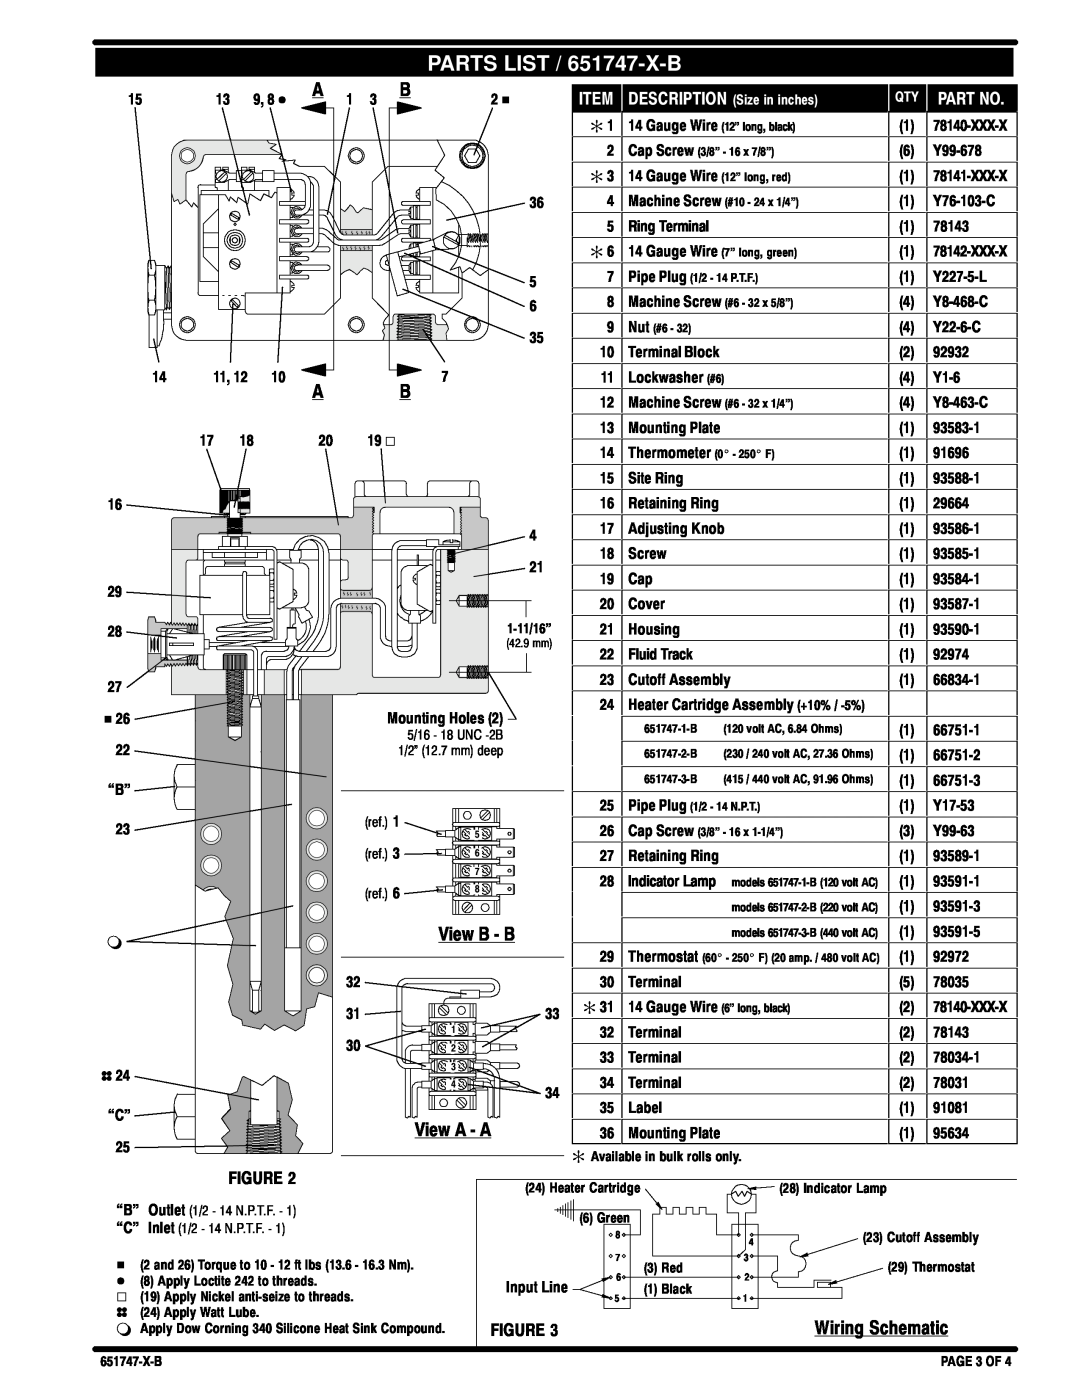 Ingersoll-Rand manual PARTS LIST / 651747-X-B, View B / B, Wiring Schematic, ITEM DESCRIPTION Size in inches, Part No 